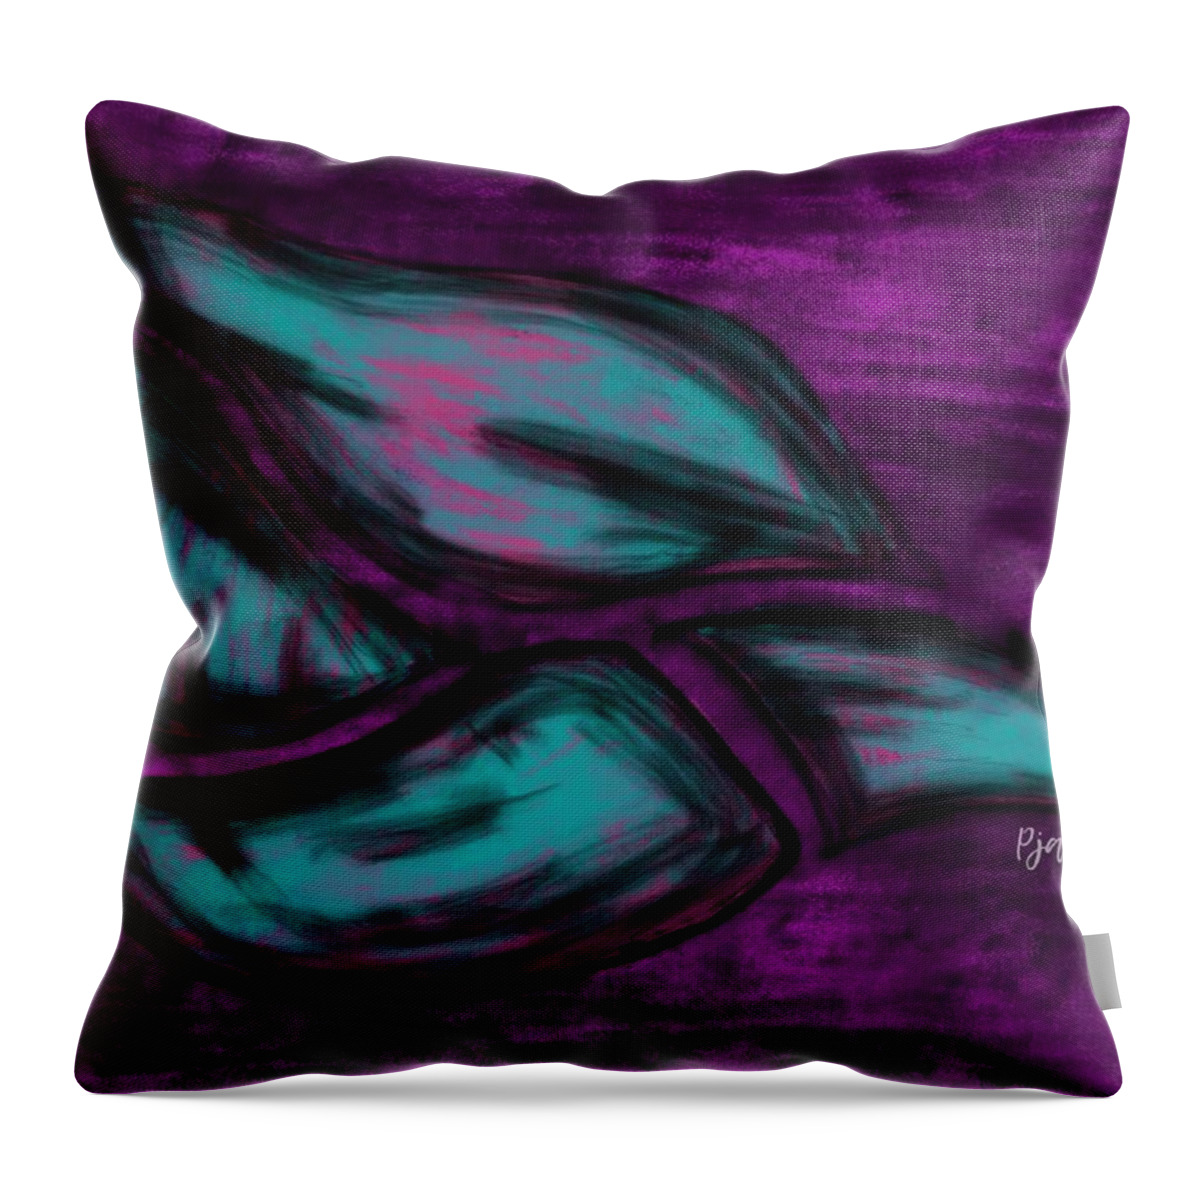 Collage Throw Pillow featuring the digital art Collage #7 by Ljev Rjadcenko